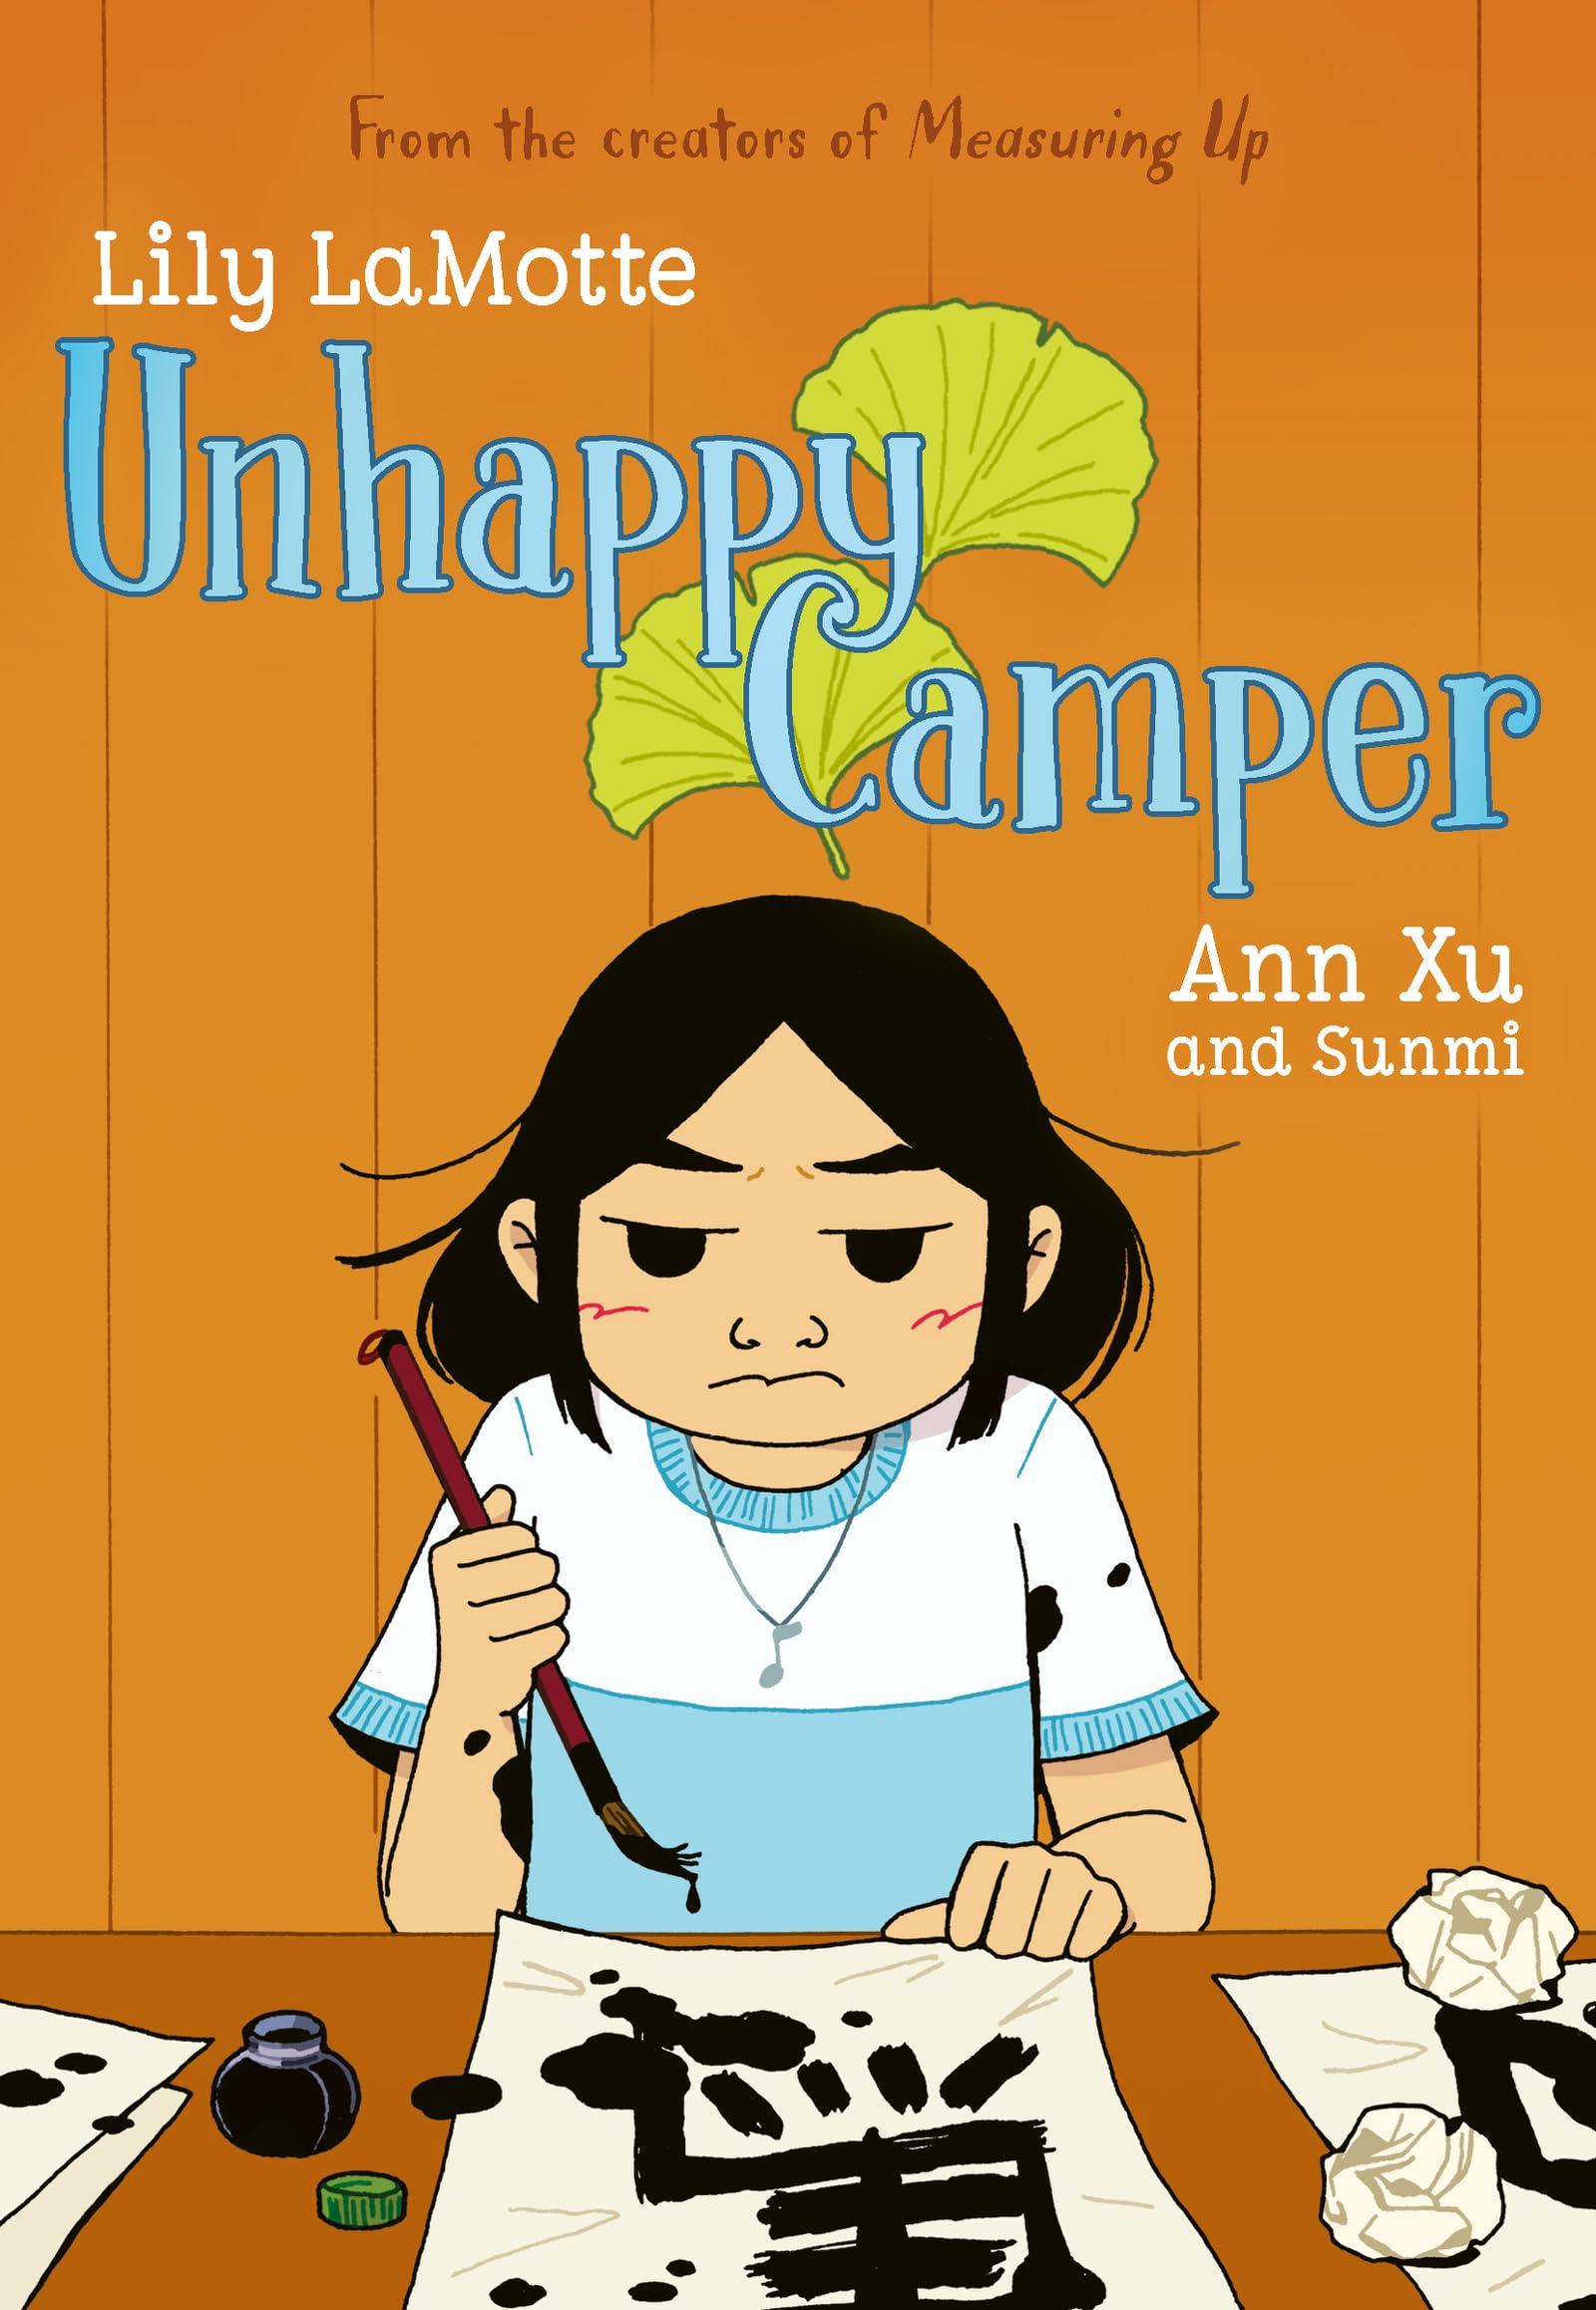 Unhappy Camper by Lily LaMotte book cover